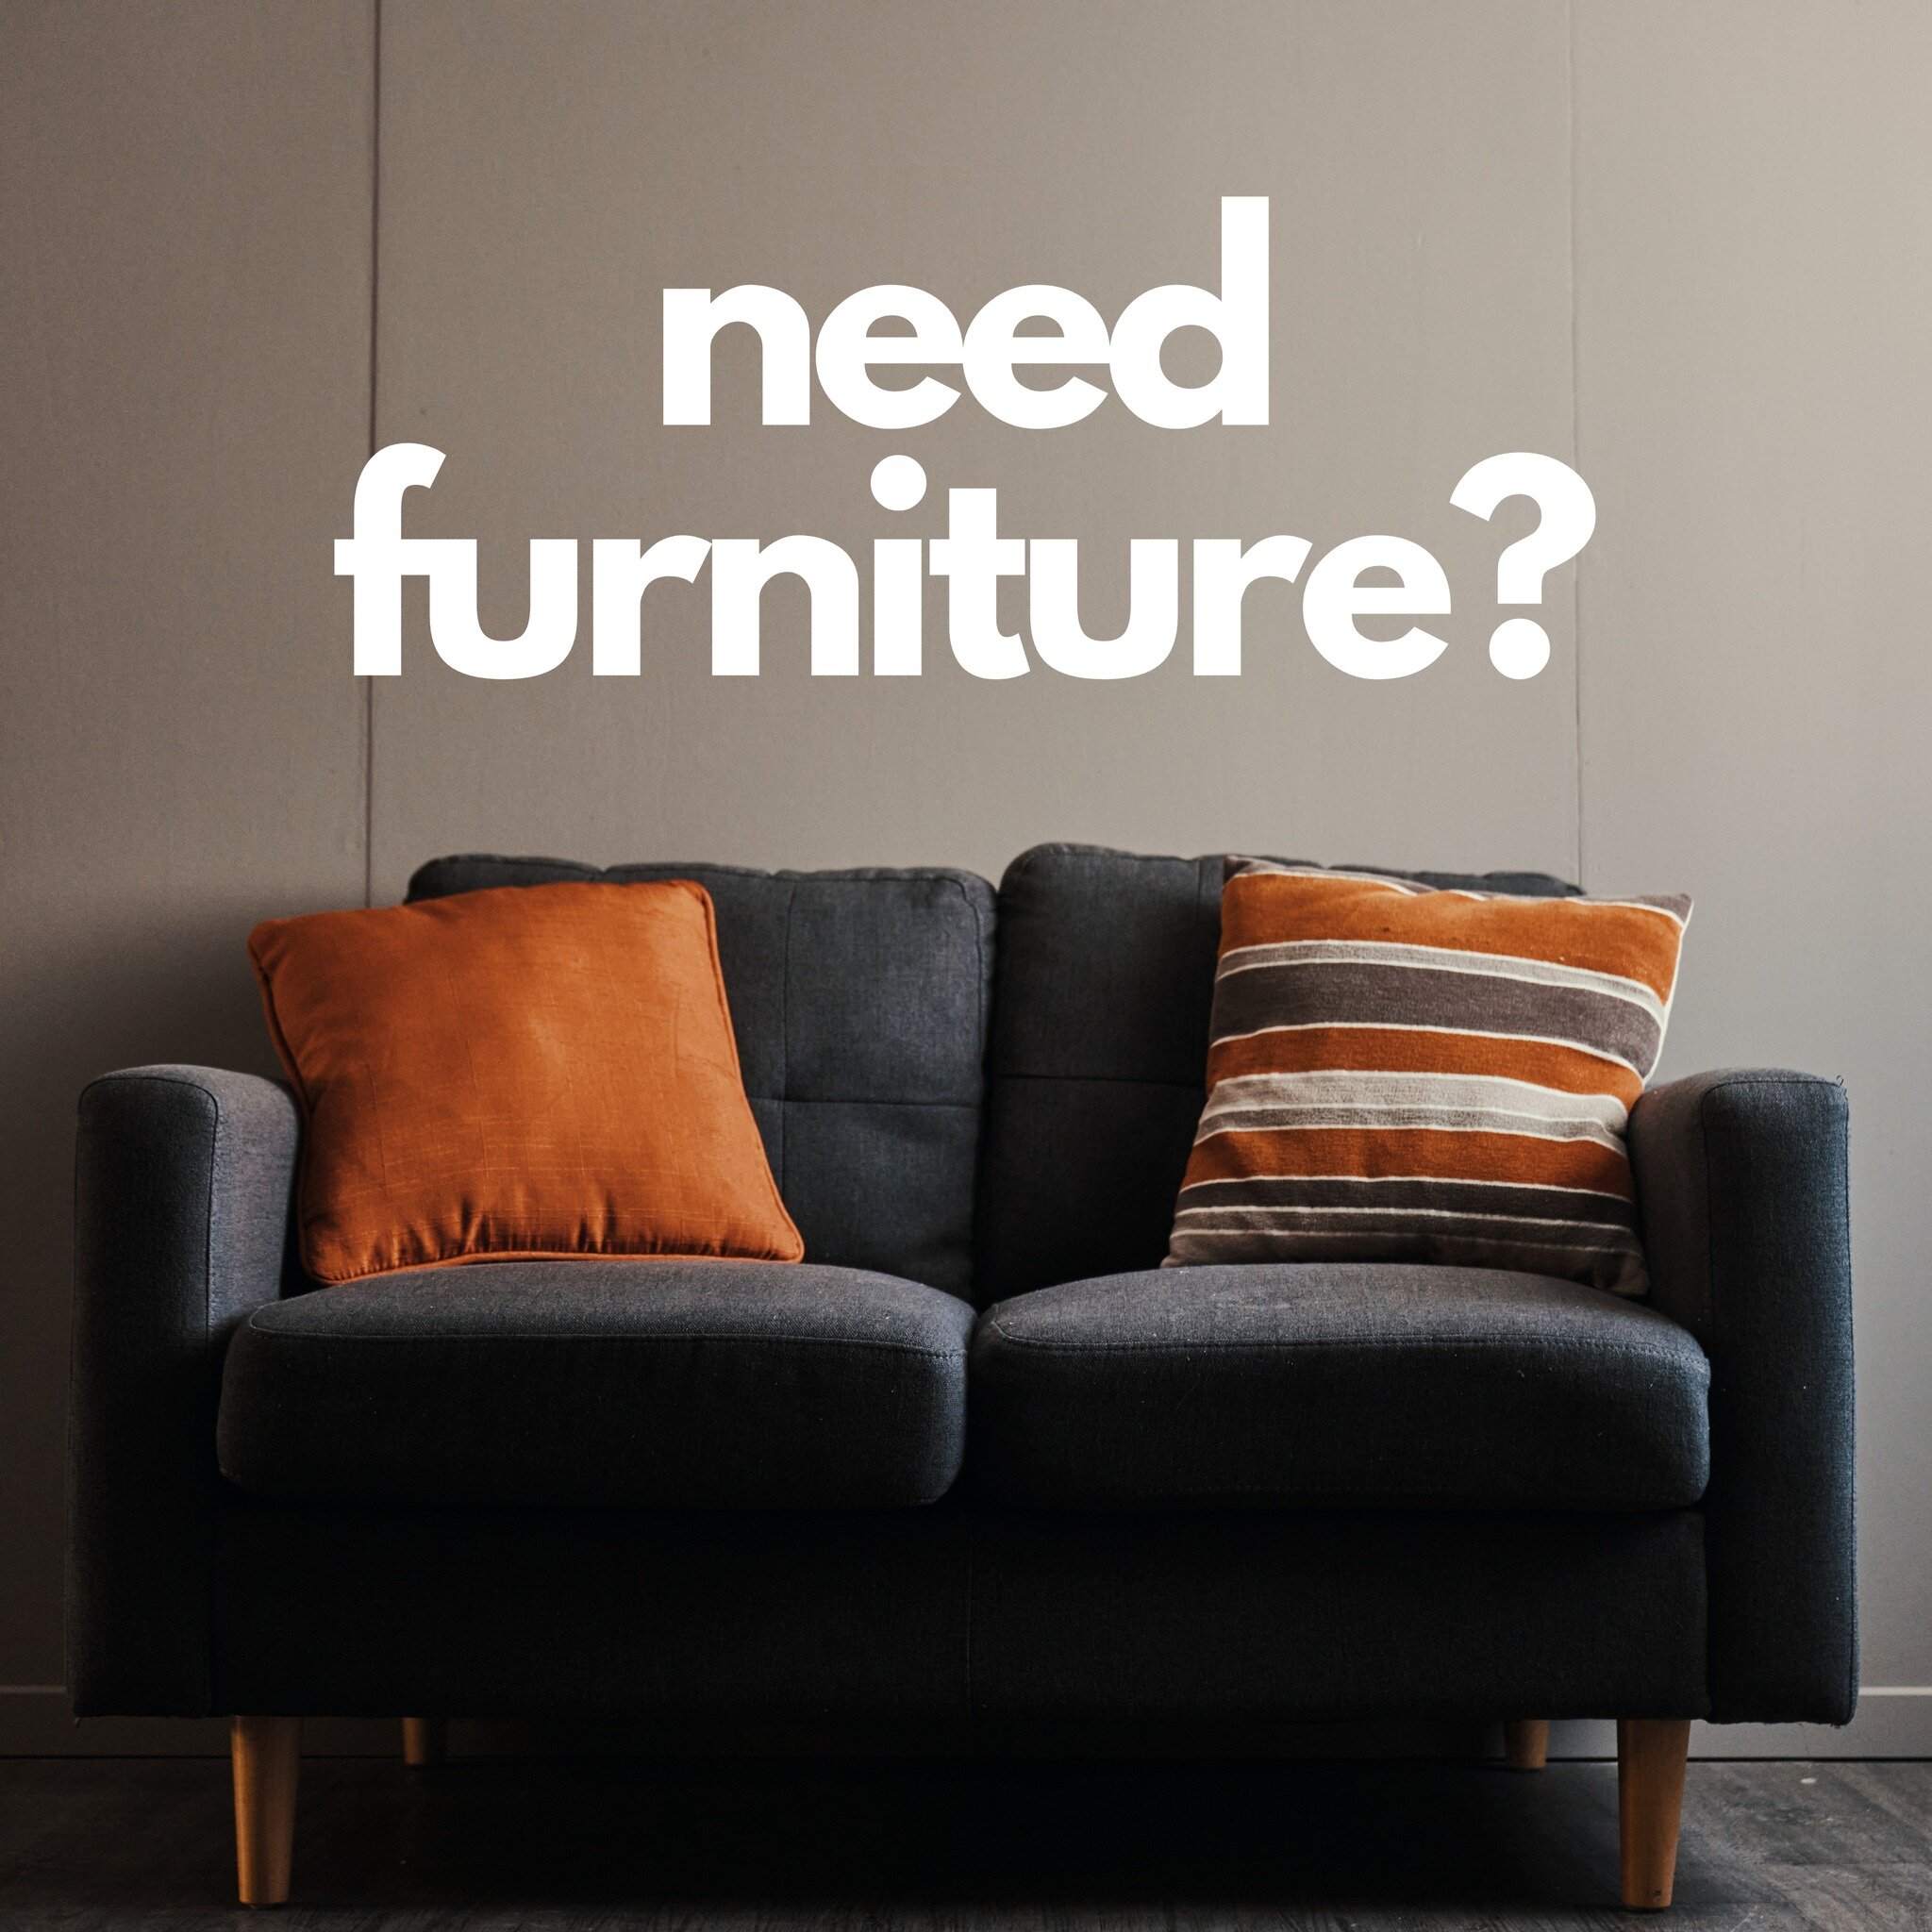 Why not turn the space into a living room? We've got furniture to transform our set into what you need for your shoot at TEN12!

#brisbanestudio #filmmaking  #ecommerce #modelling #commerical #photographystudio #studiohire #brisbane #commercialphotog